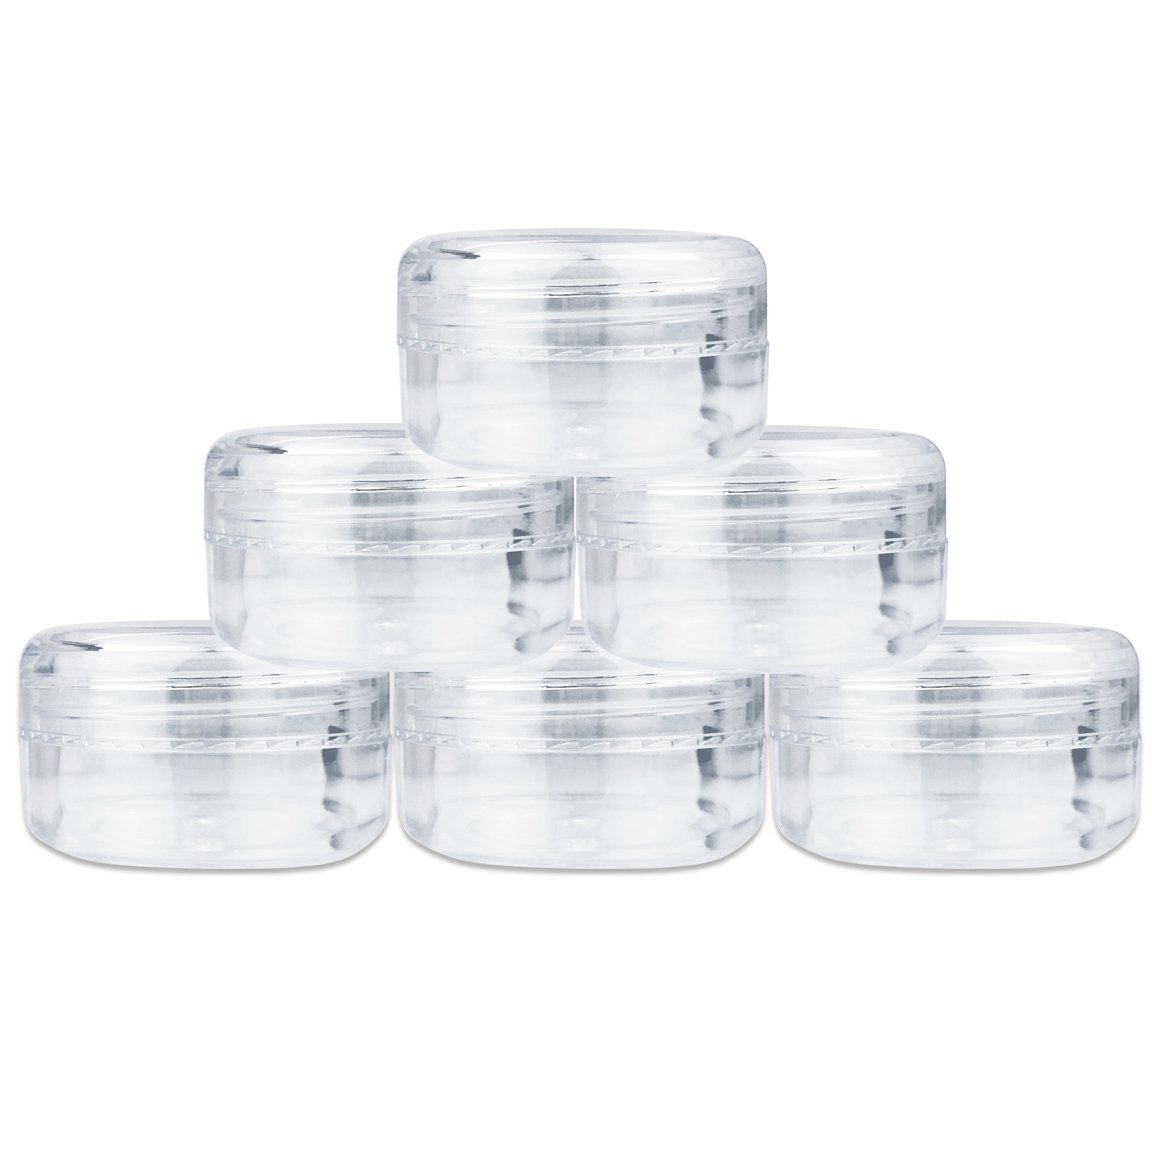 (Quantity: 24 Pieces) Beauticom 15G/15ML (0.5oz) Round Clear Jars with Screw Cap Lid for Lotion, Creams, Toners, Lip Balms, Makeup Samples - BPA Free